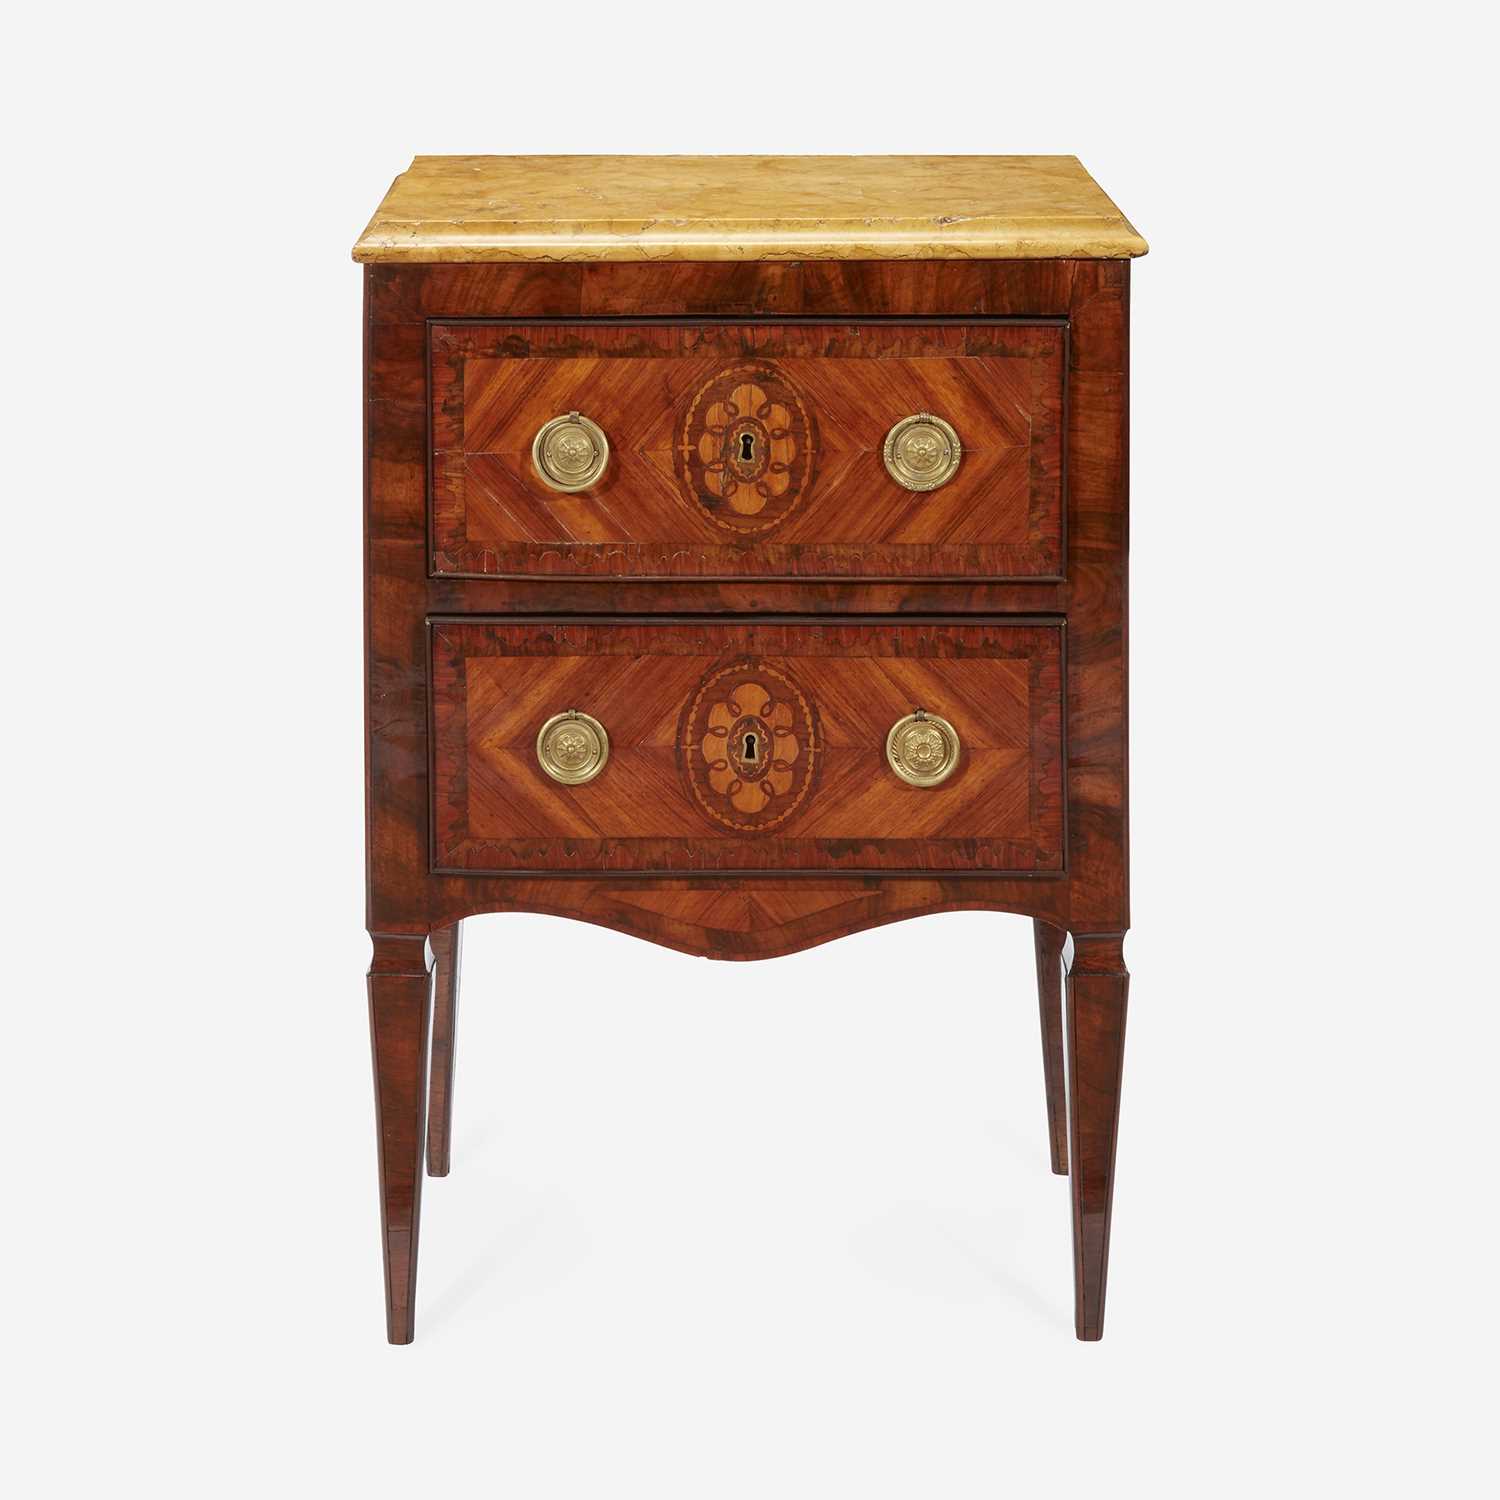 Lot 159 - An Italian Neoclassical Walnut and Fruitwood Marquetry Side Table with Marble Top